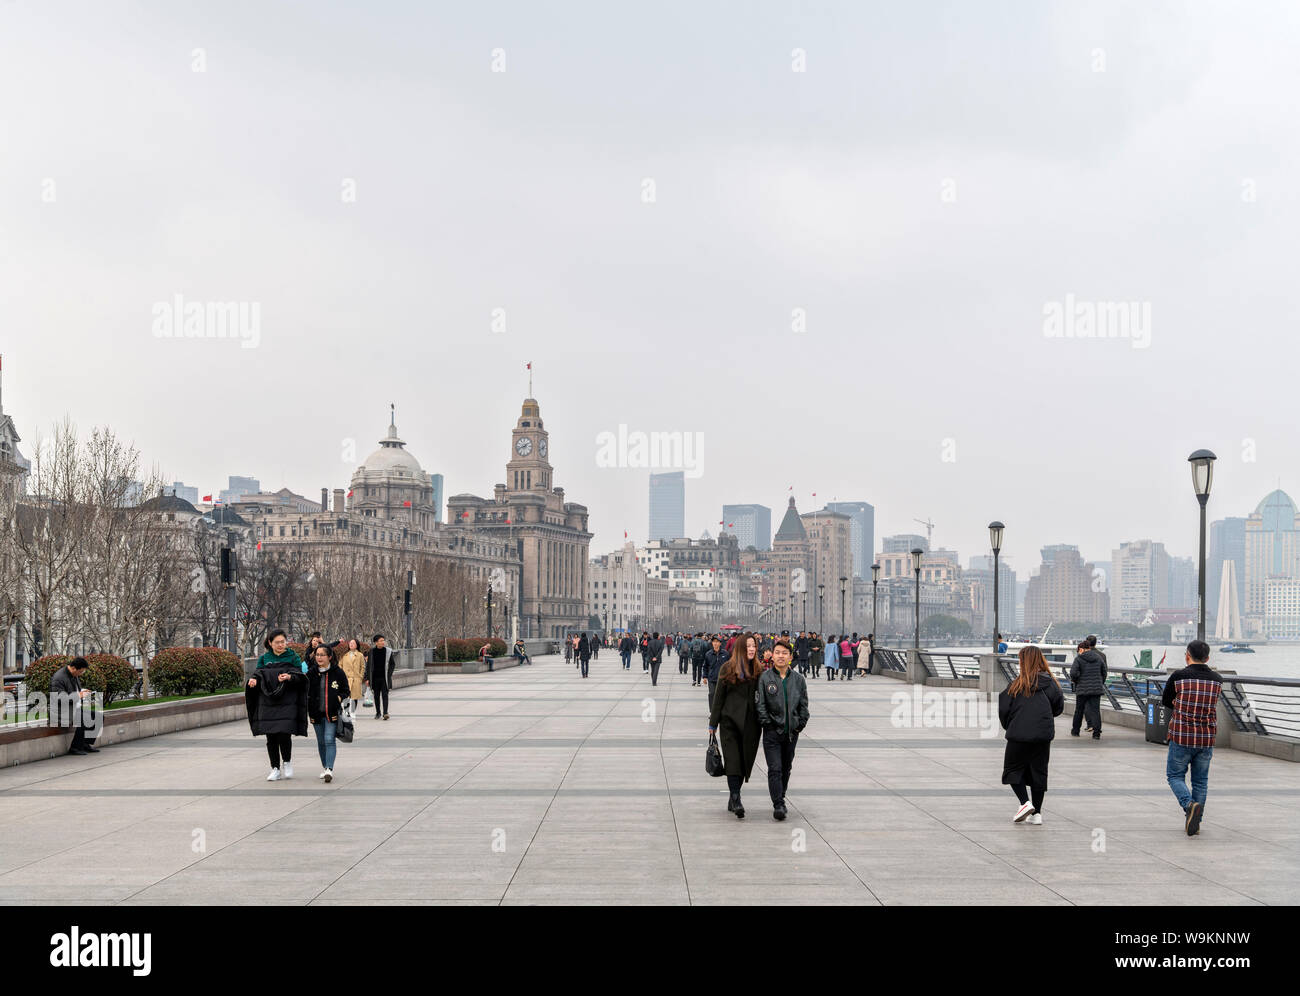 The Bund (Waitan) and Huangpu River in early March 2019 when the AQI (Air Quality Index) was over 200, Shanghai, China Stock Photo